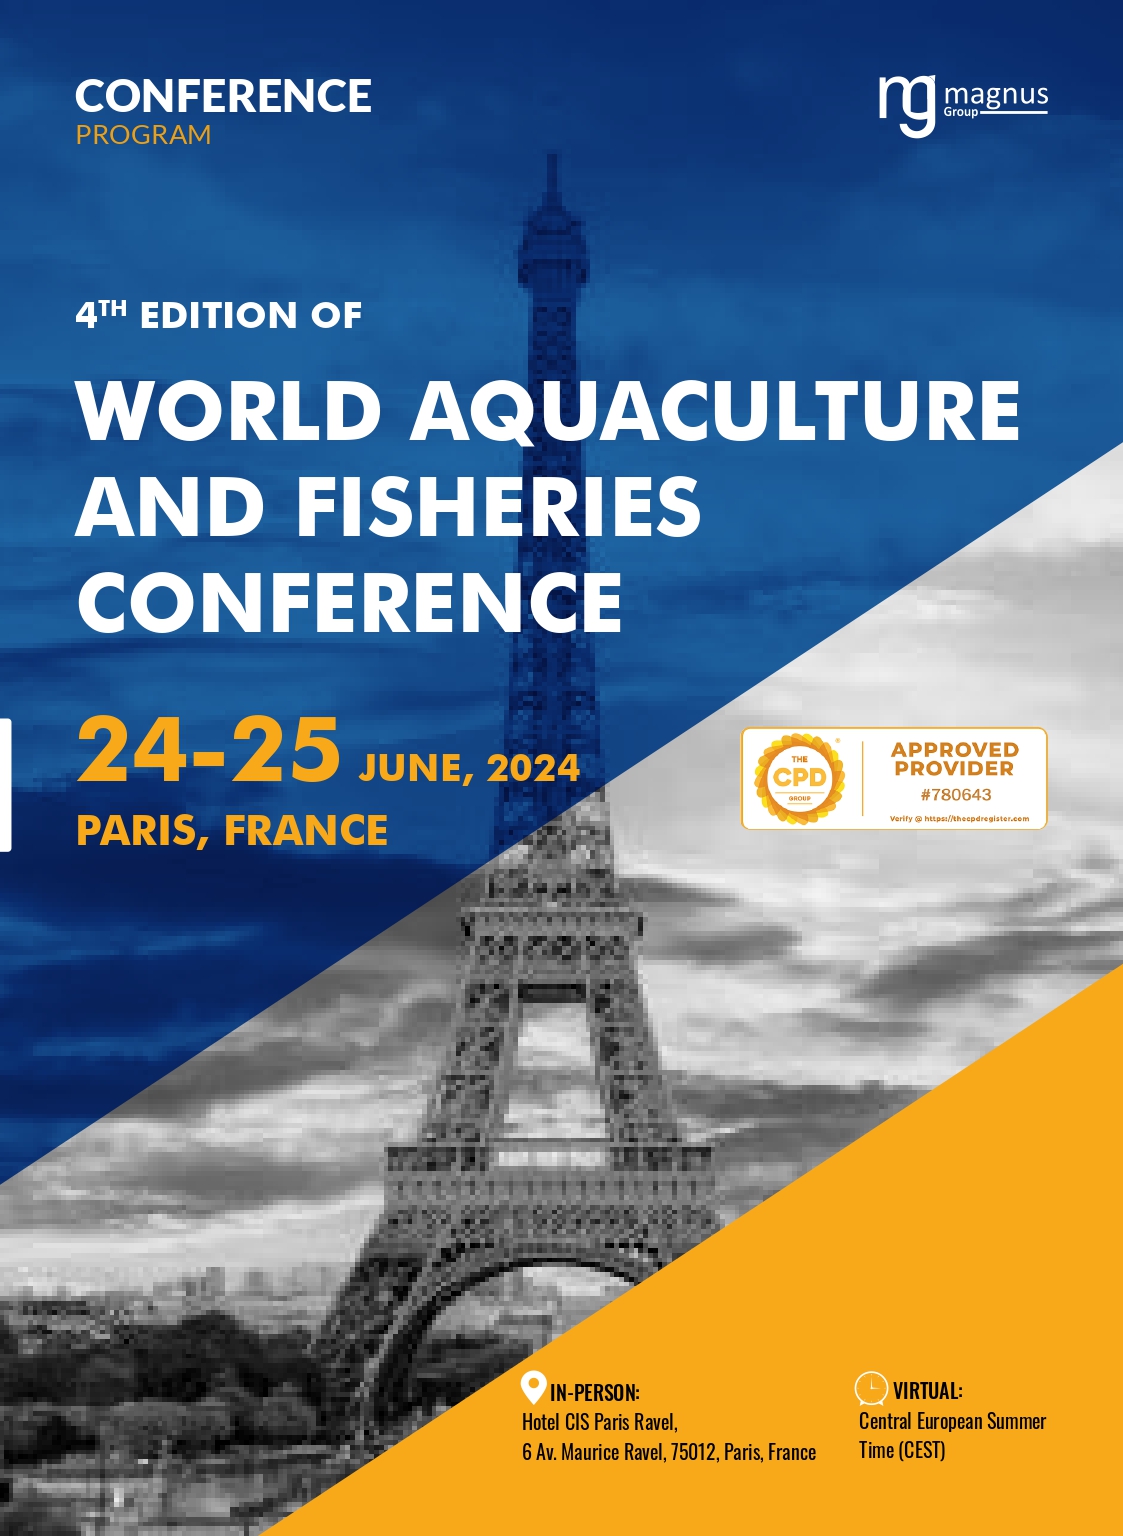 4th Edition of World Aquaculture and Fisheries Conference | Paris, France Program